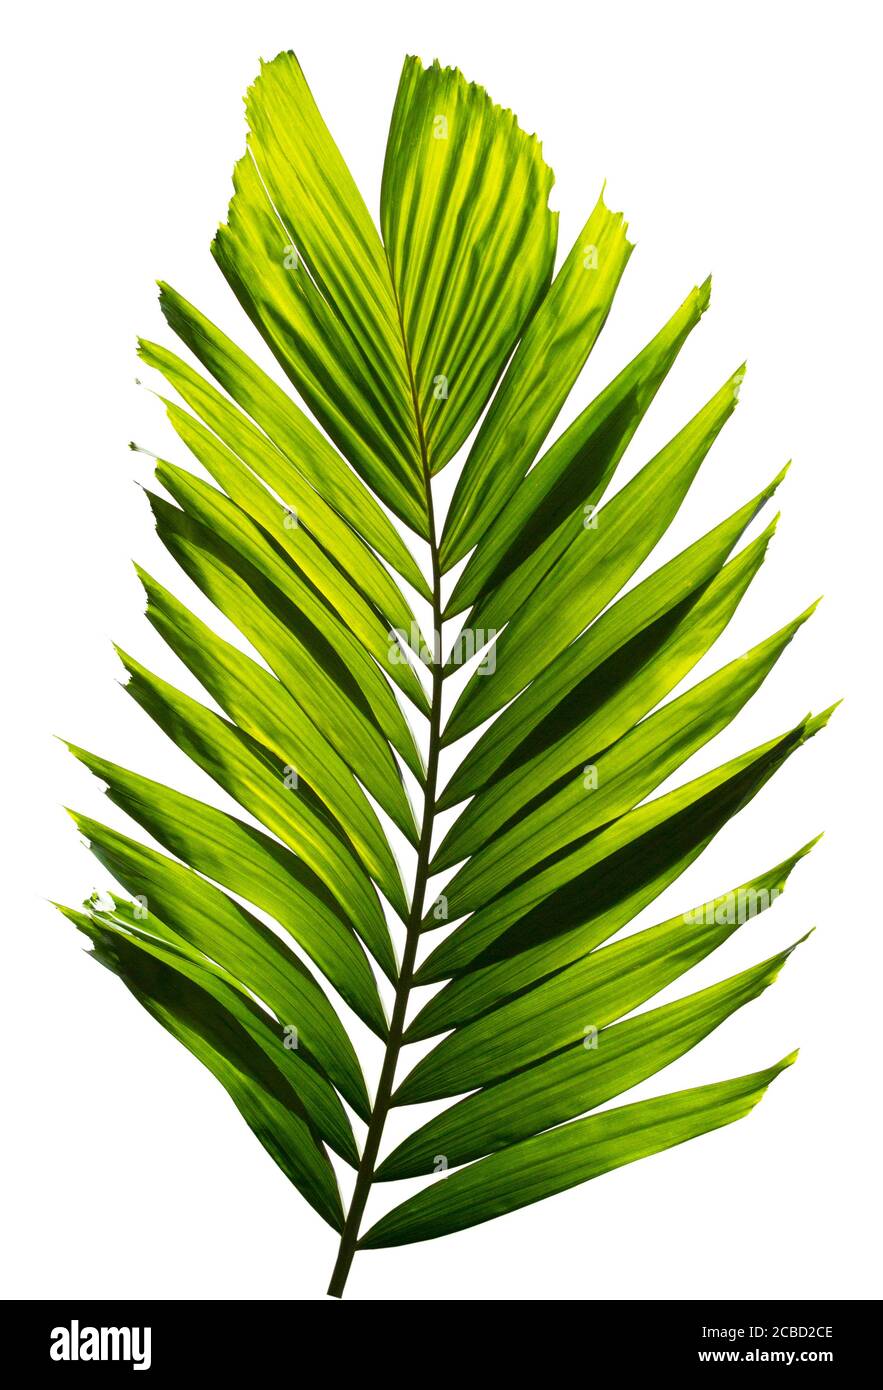 Green palm leaf isolated on white background Stock Photo